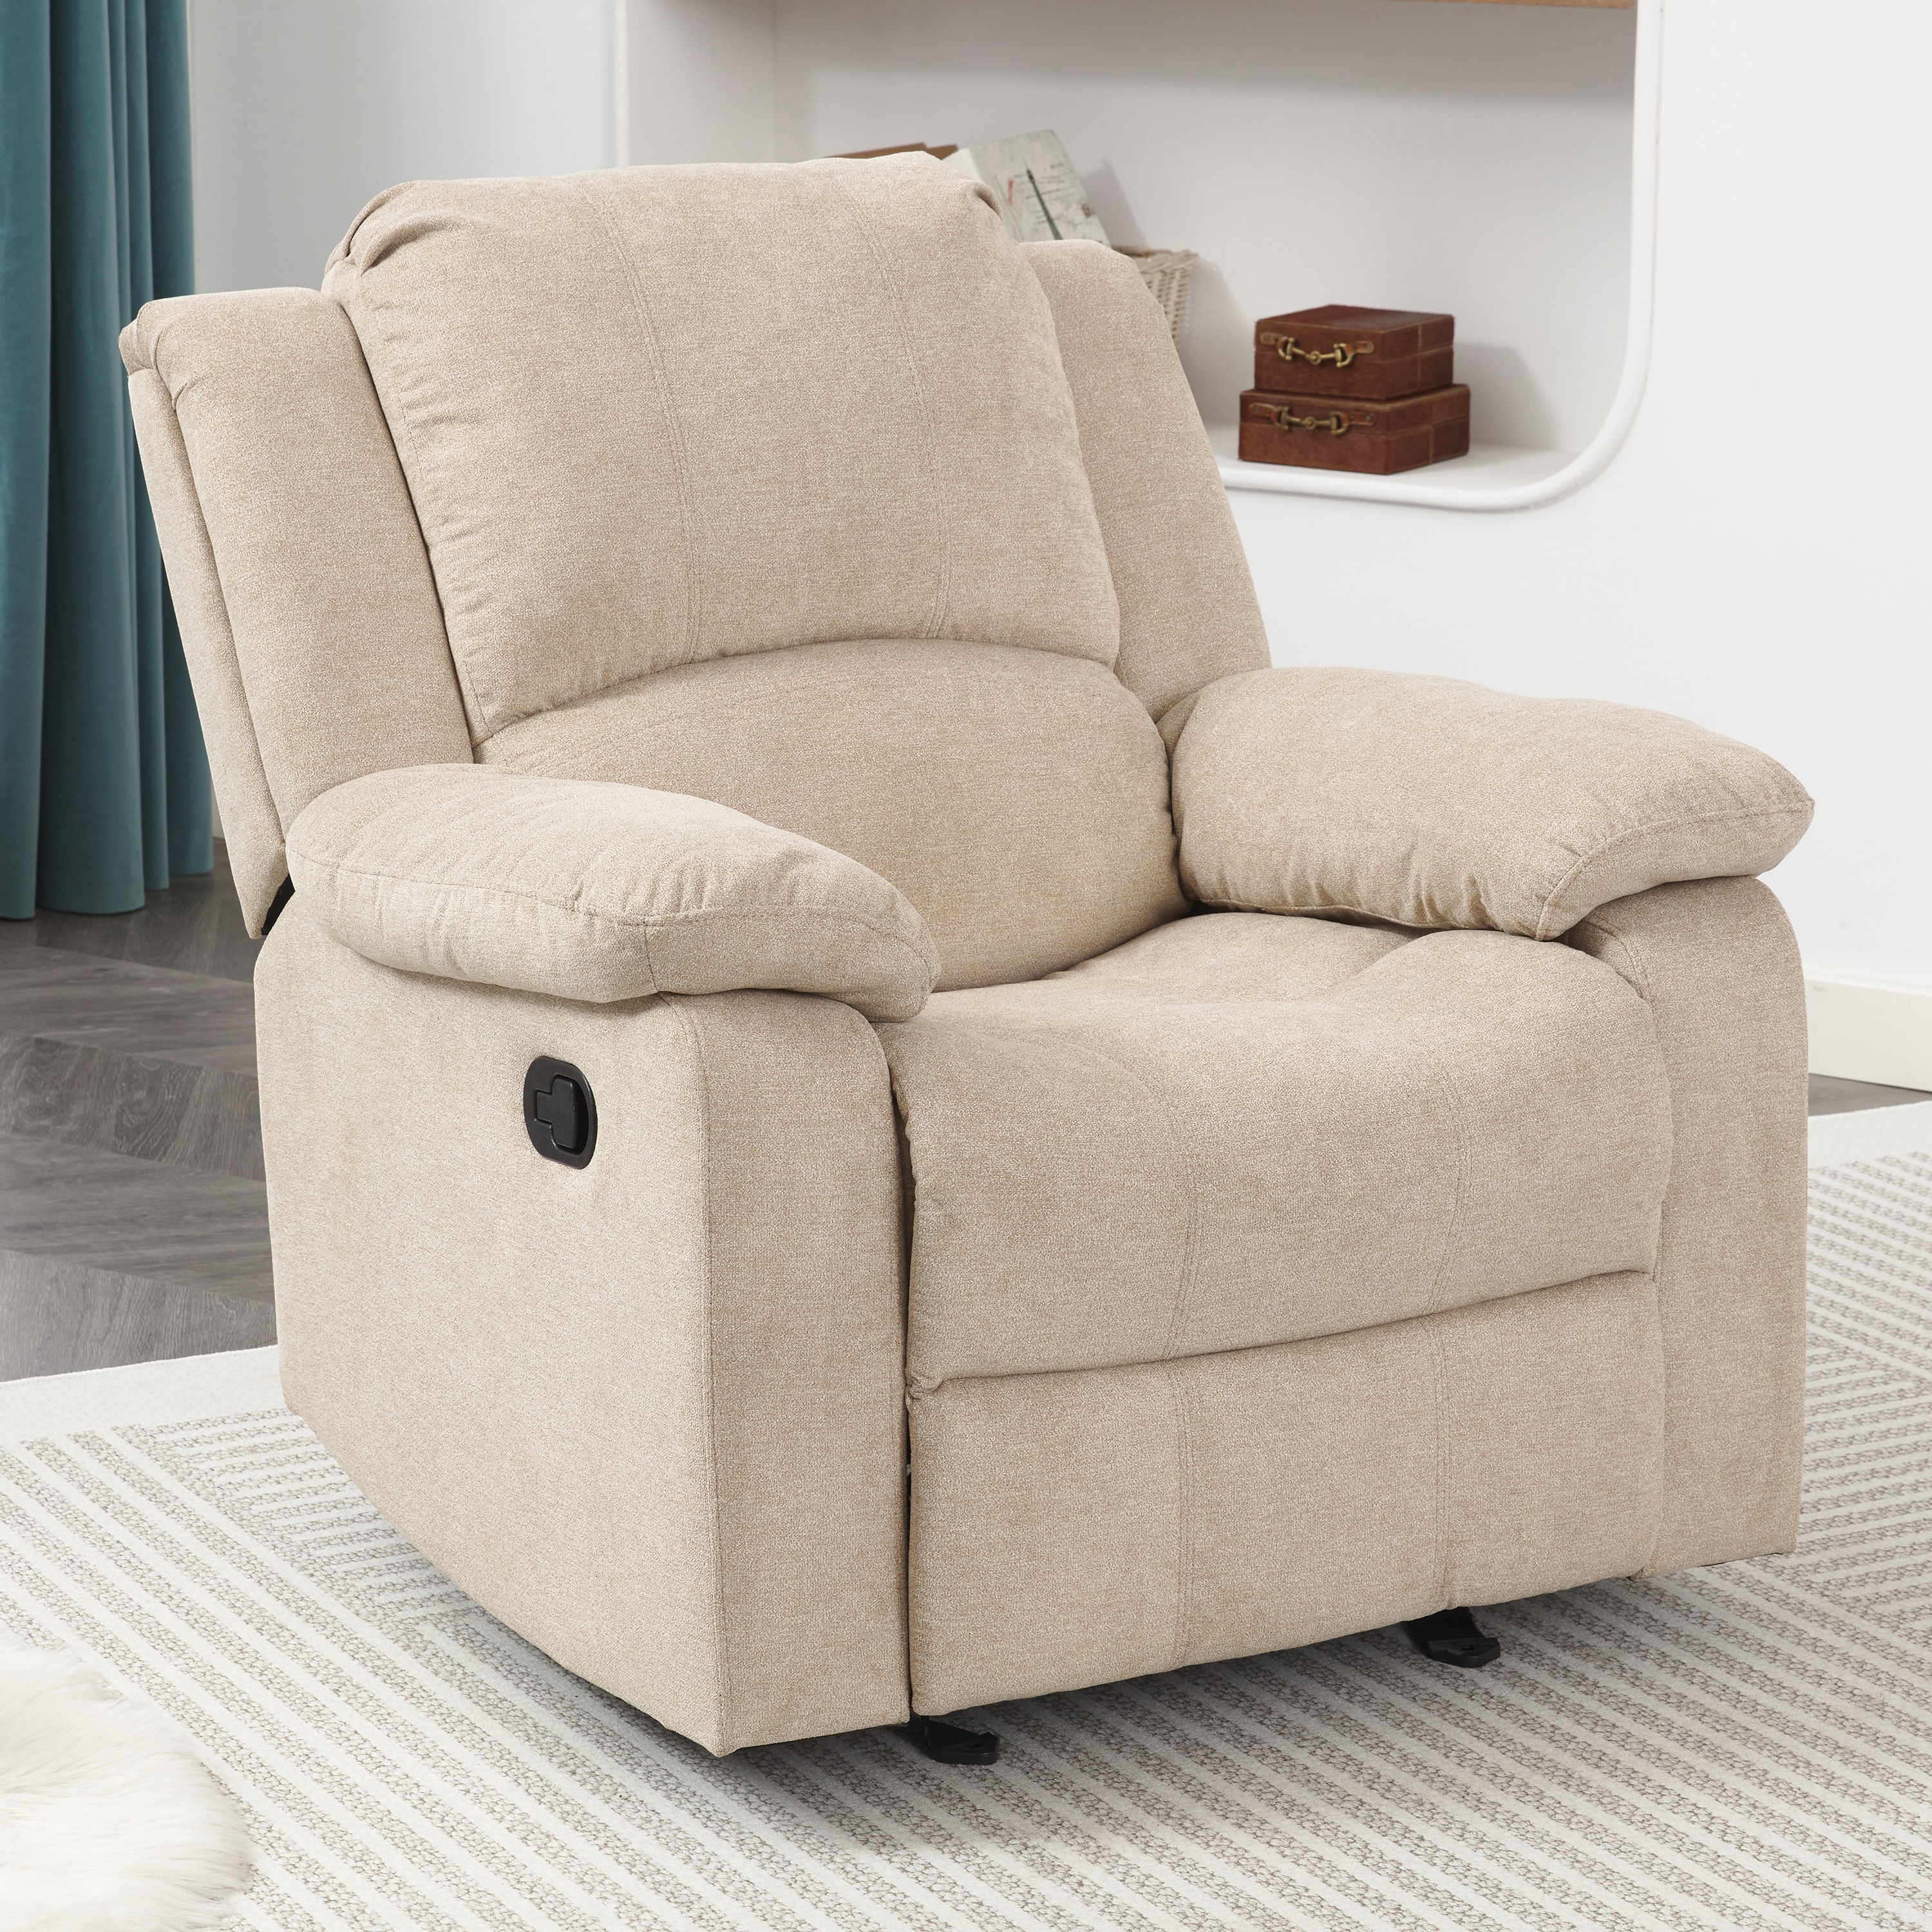 Casual Recliner Chairs - Bed Bath & Beyond